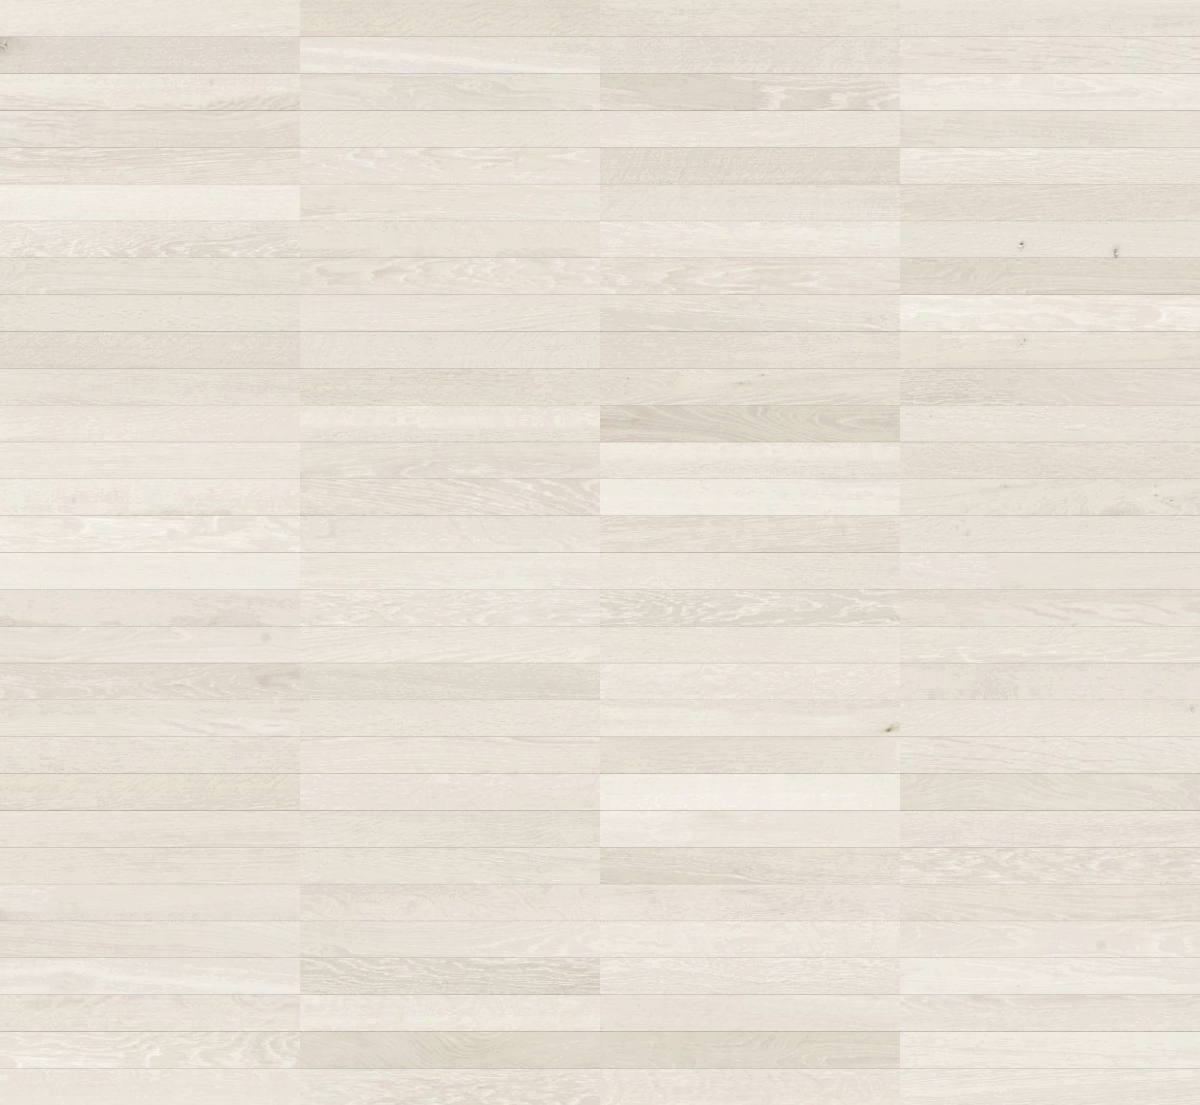 A seamless wood texture with white oiled timber boards arranged in a Stack pattern